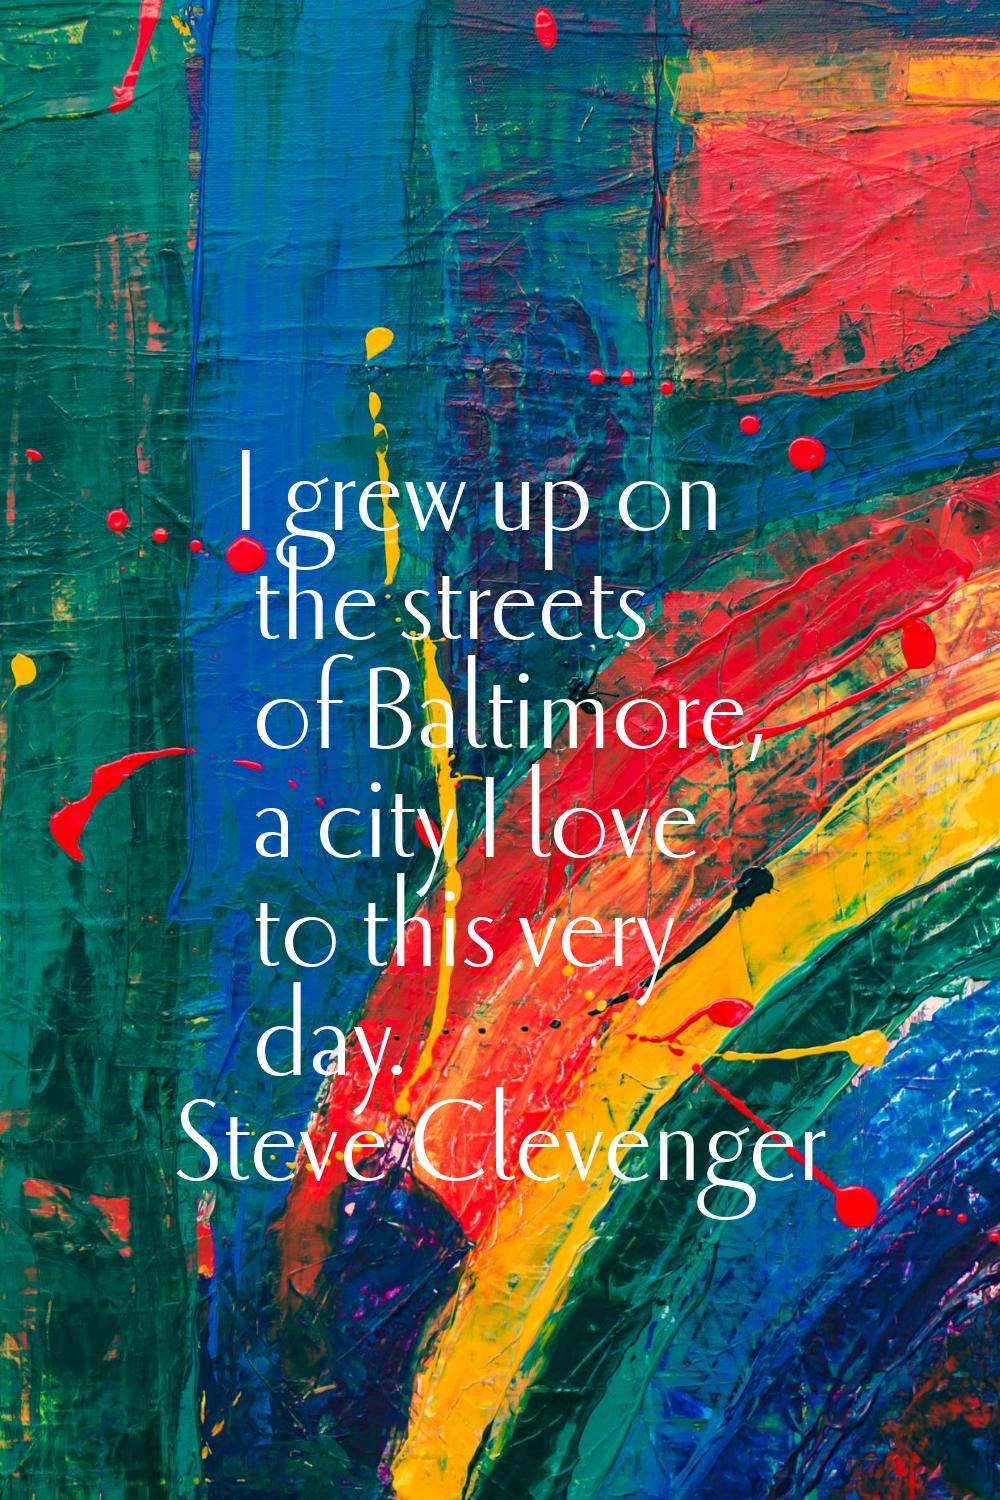 I grew up on the streets of Baltimore, a city I love to this very day.